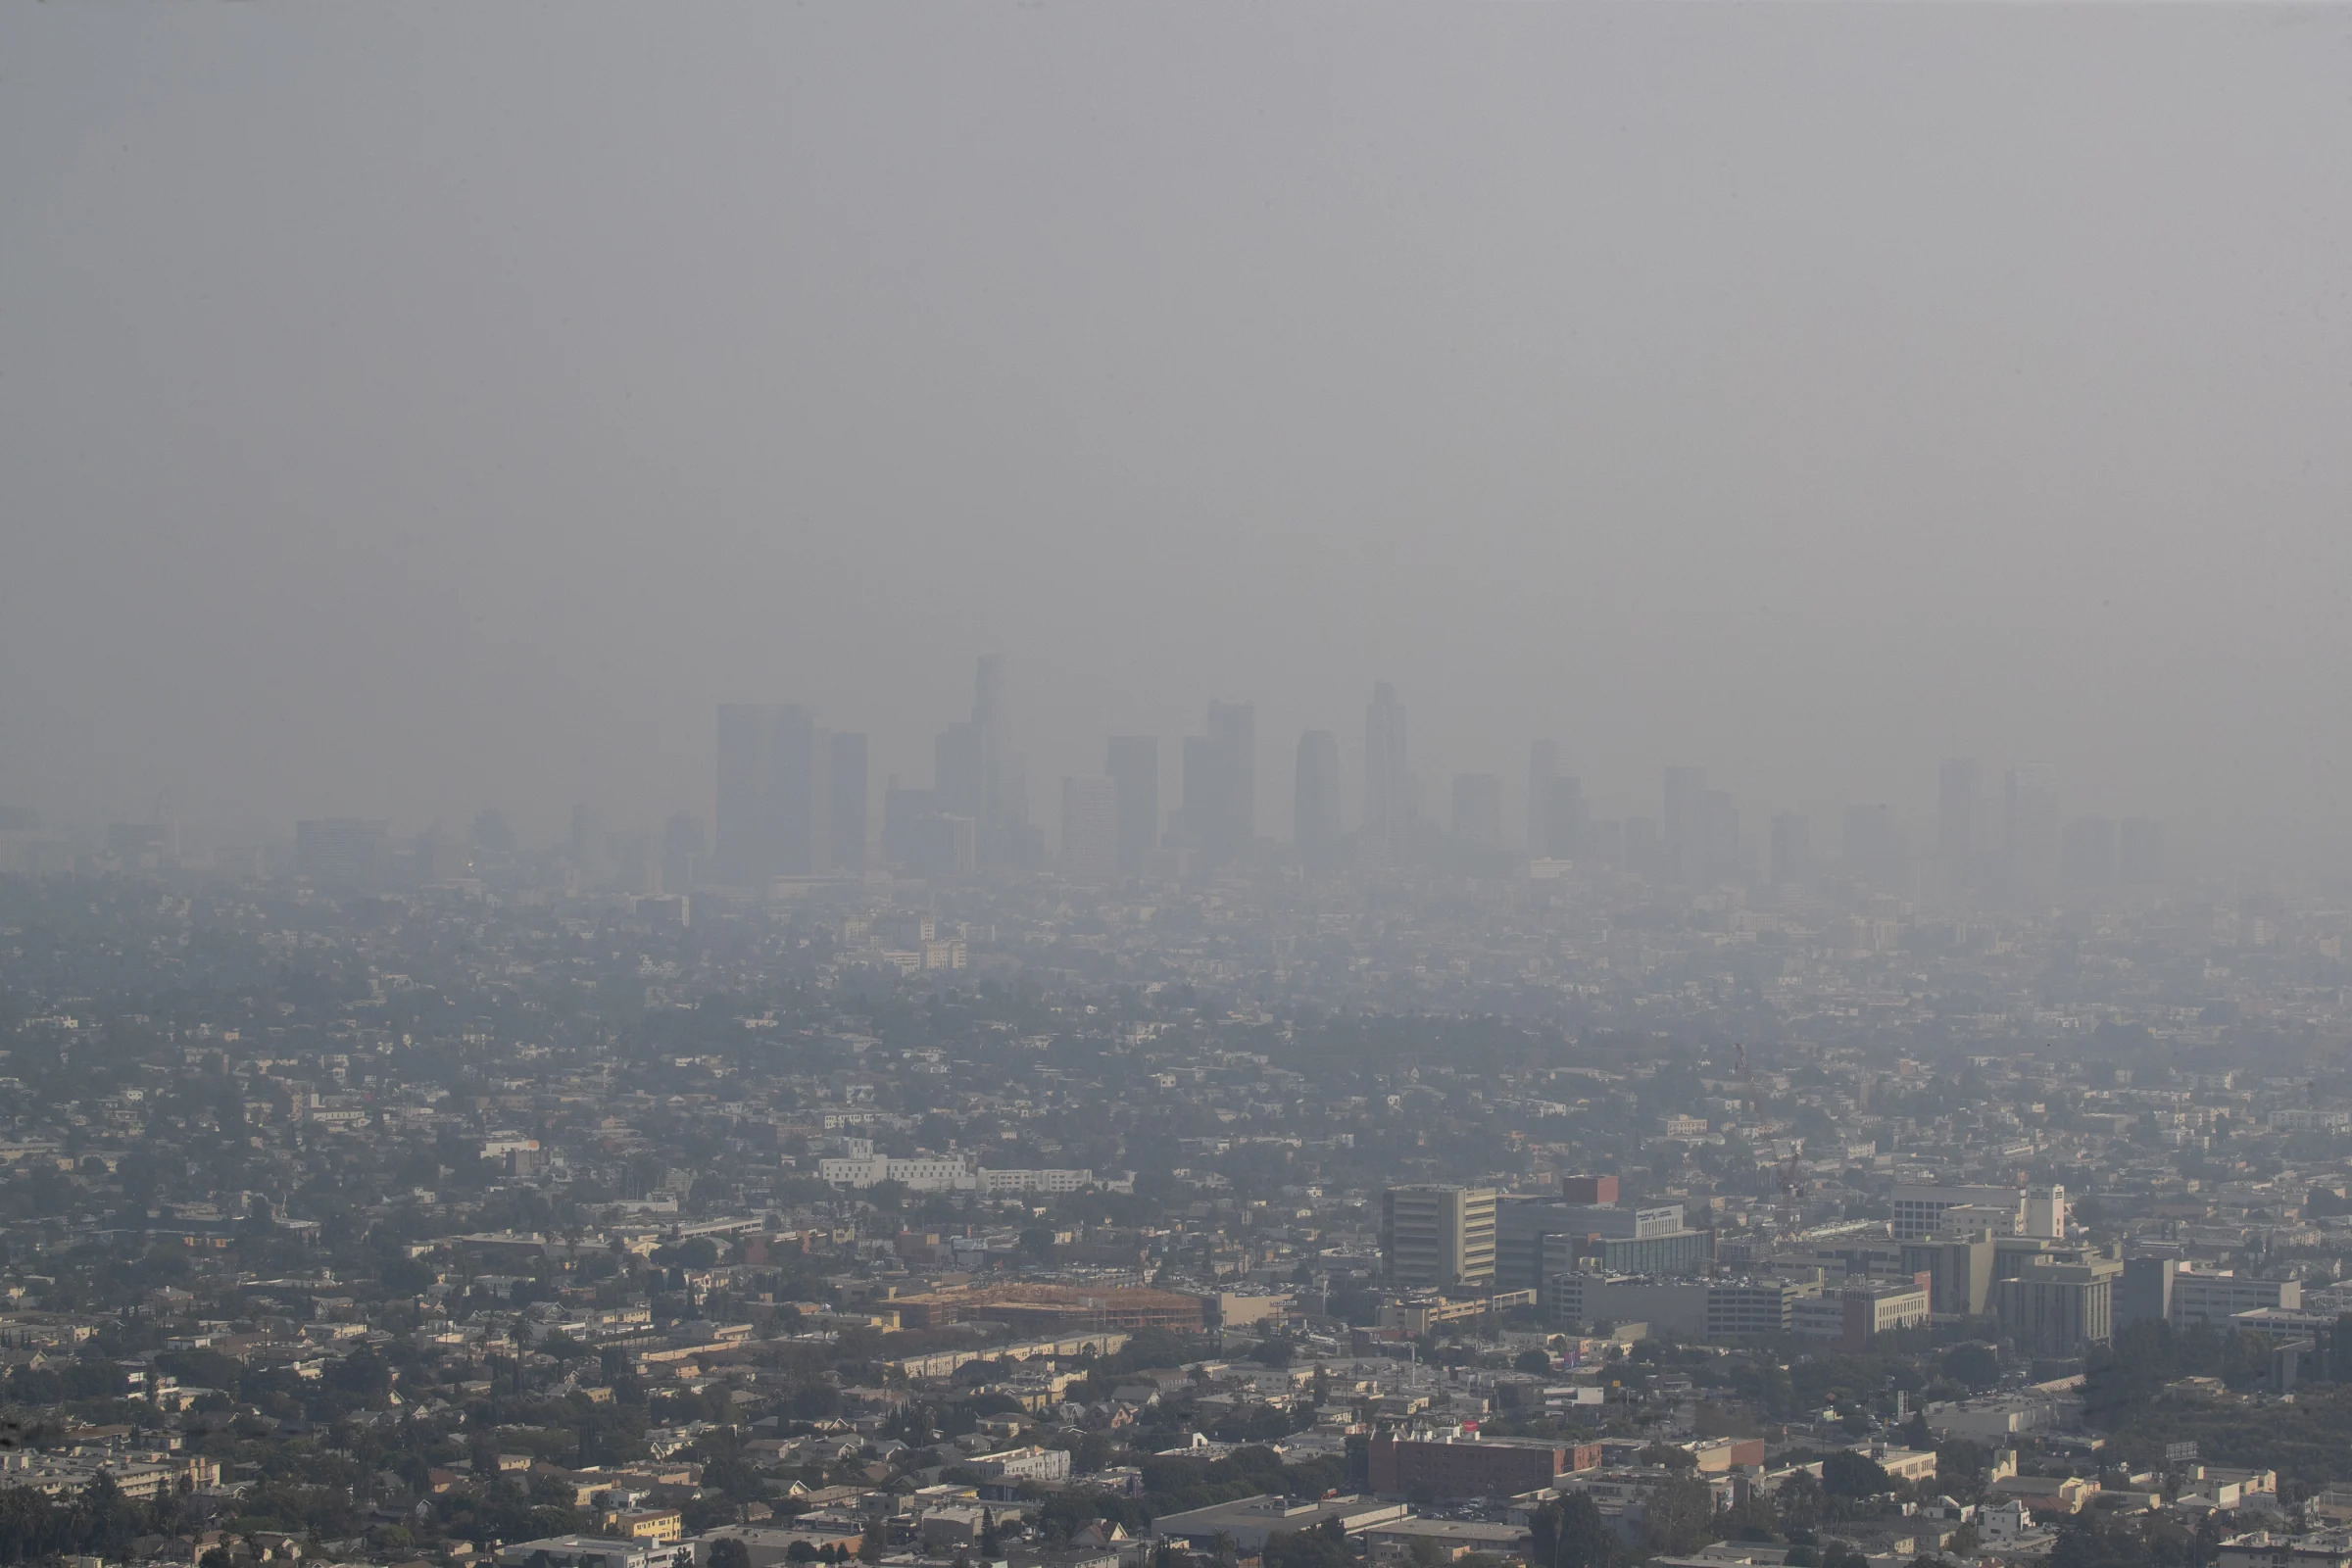 The view of downtown Los Angeles skyline is obscured by smoke, ash and smog as seen from the Griffith Observatory Monday, Sept. 14, 2020. / Credit: Allen J. Schaben / Los Angeles Times via Getty Images